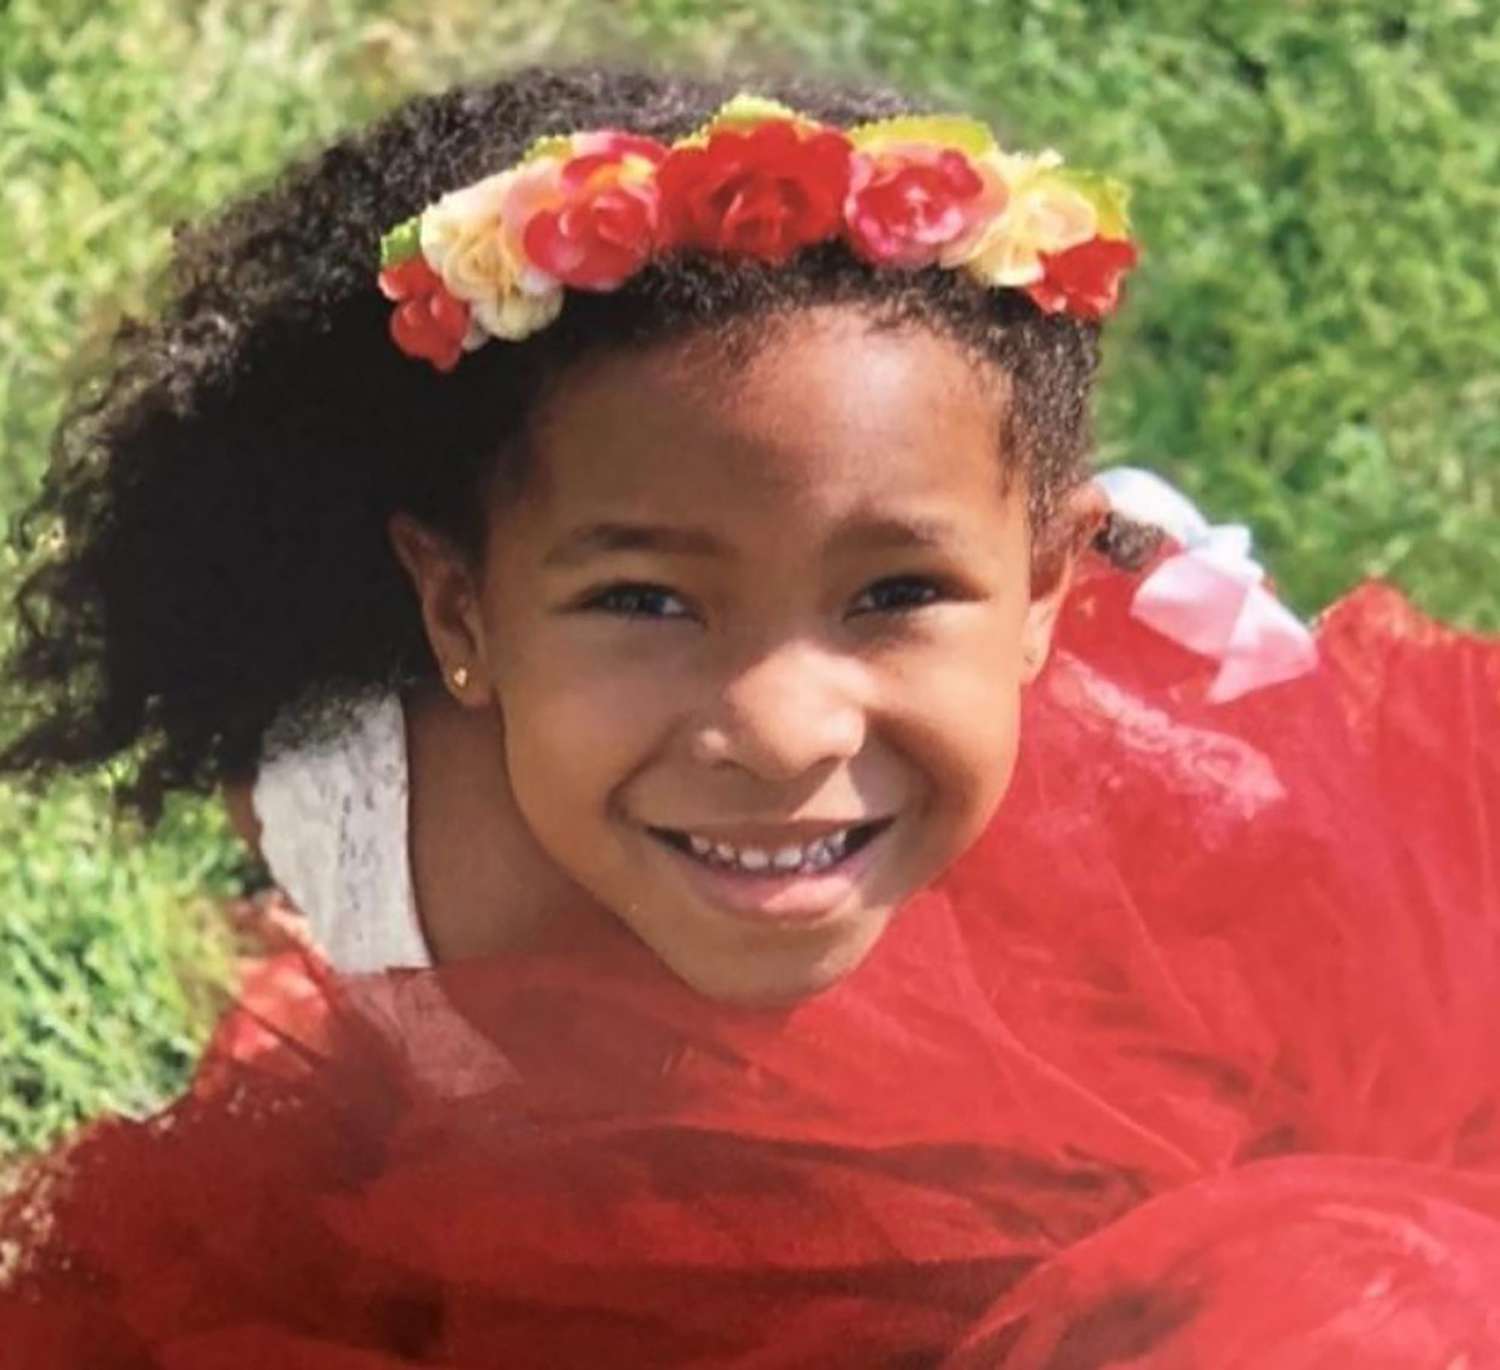 Missing 6-year-old Elle Ragin from Minnesota as her mother appears to have committed suicide.